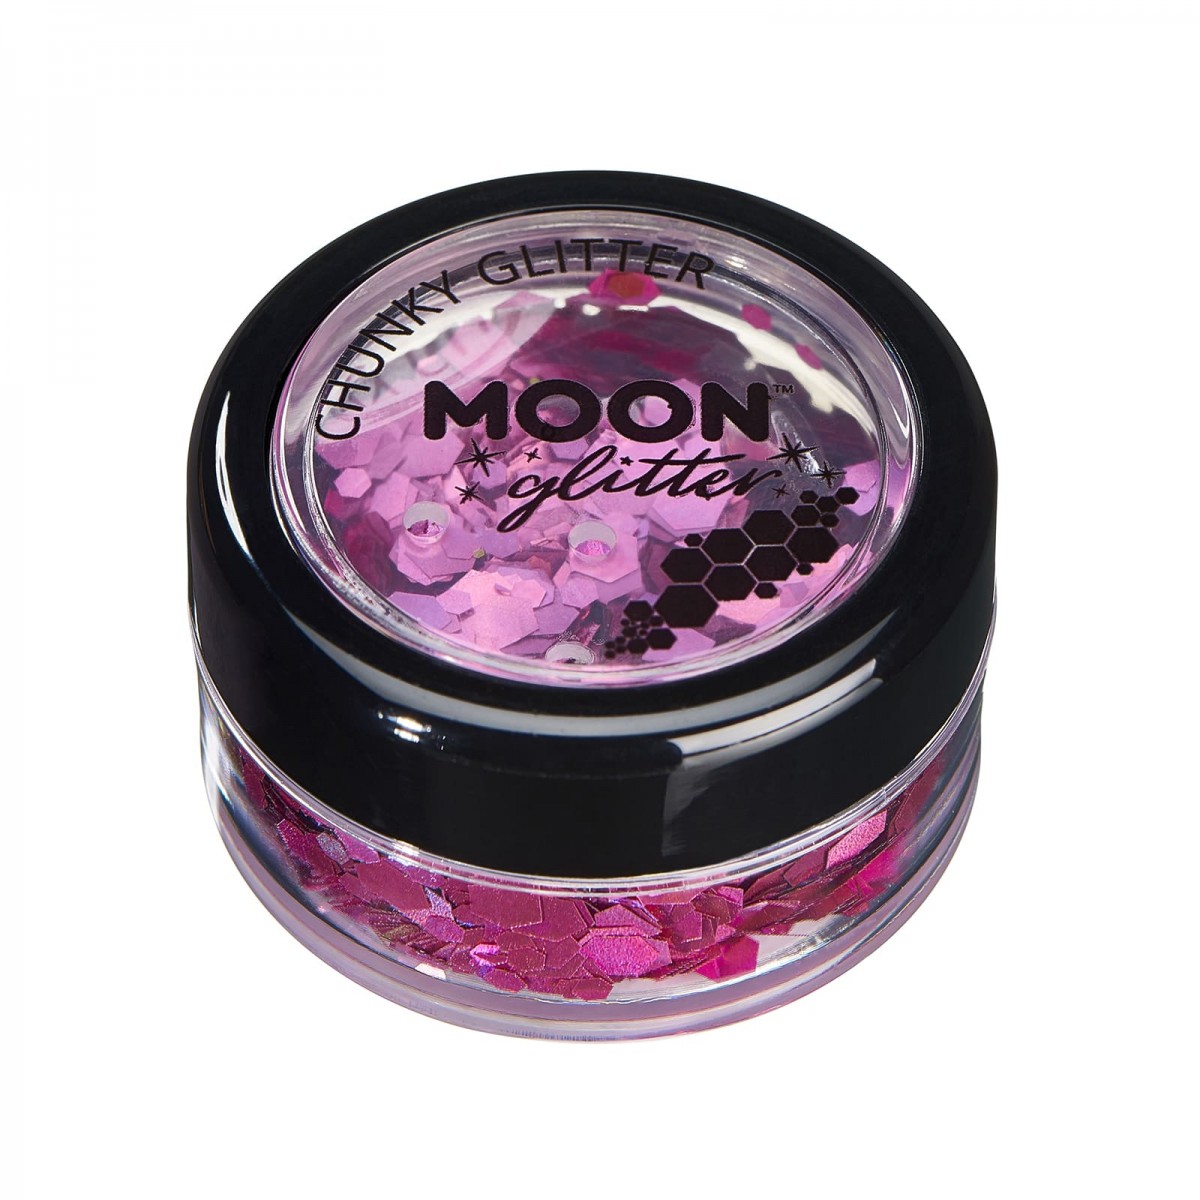 MOON CREATIONS G4 HOLOGRAPHIC CHUNKY GLITTER PINK 3g